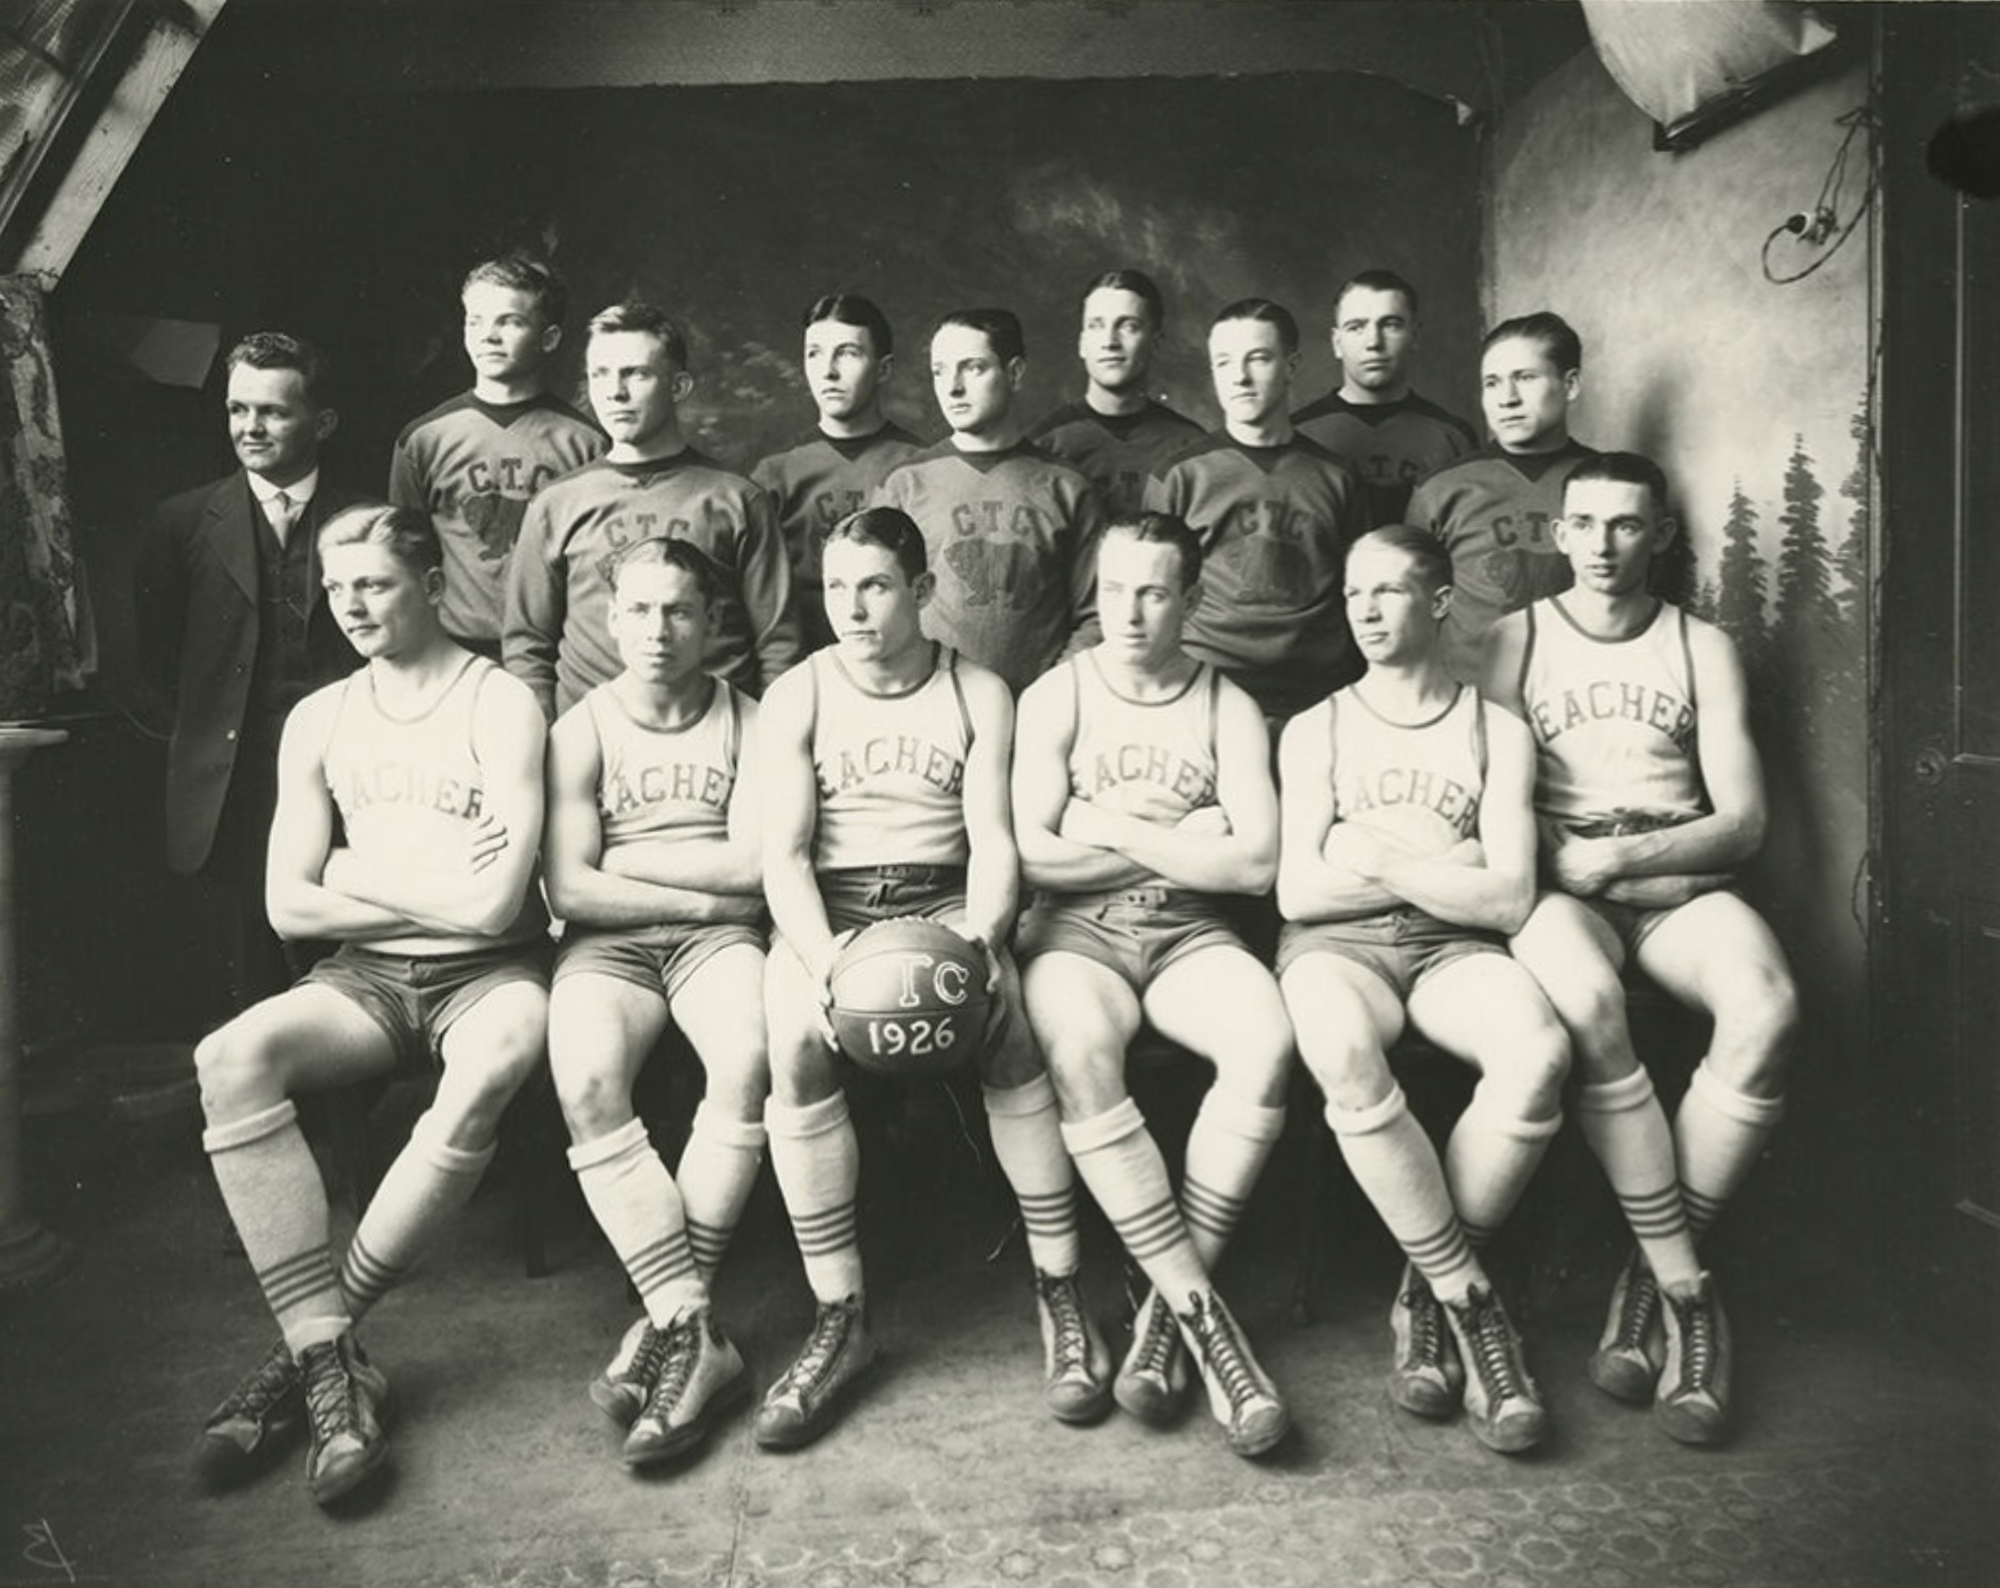 Dauth Family Archive - 1926 - High Plains Library District - Colorado Teachers College Basketball Team